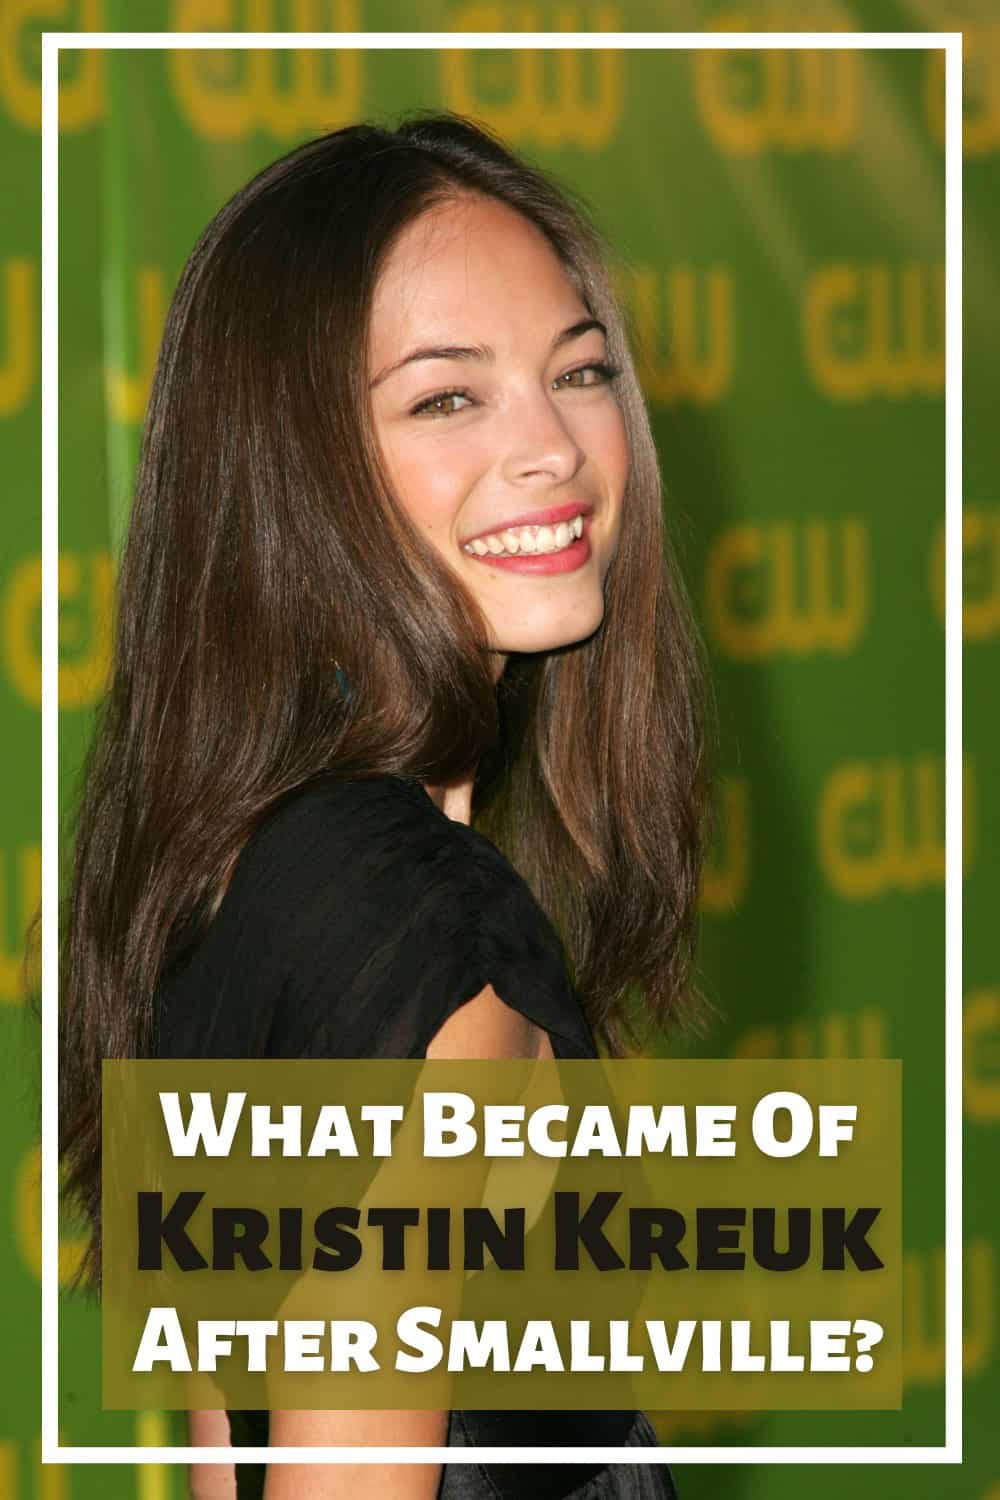 What happened to Kristin Kreuk After Smallville?